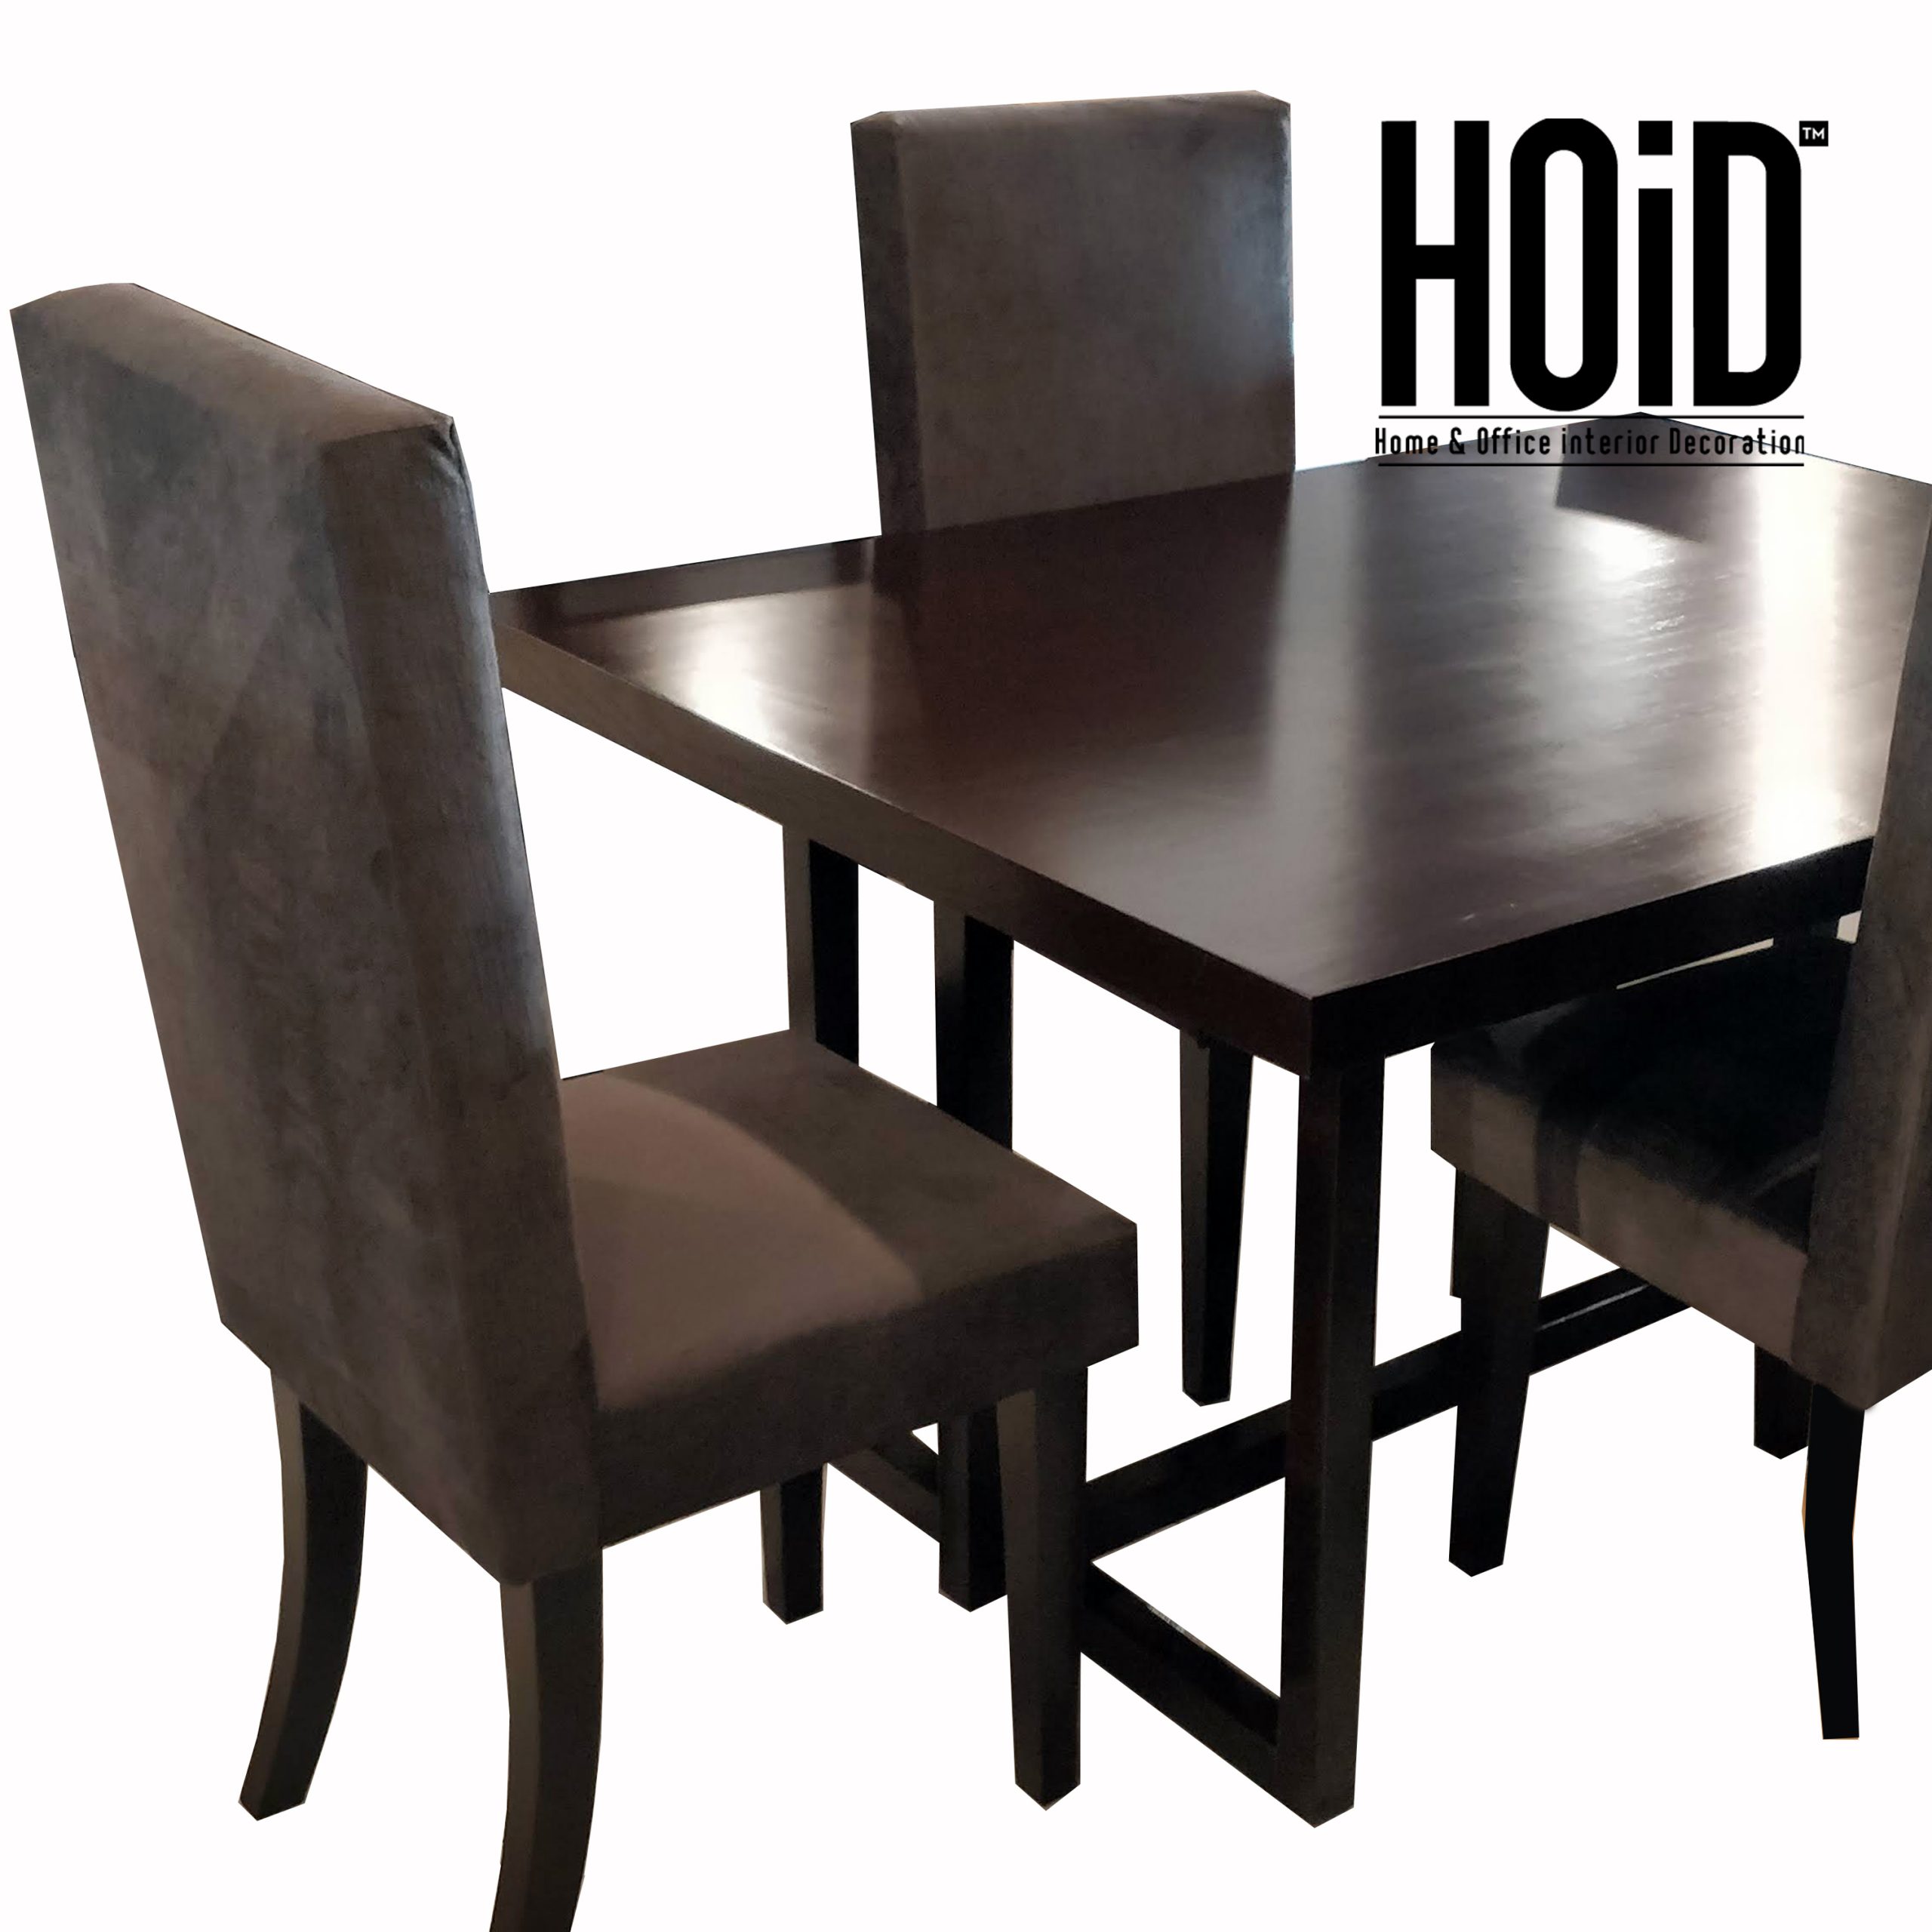 mit-dining-table-with-4-chairs-scaled-2.jpg